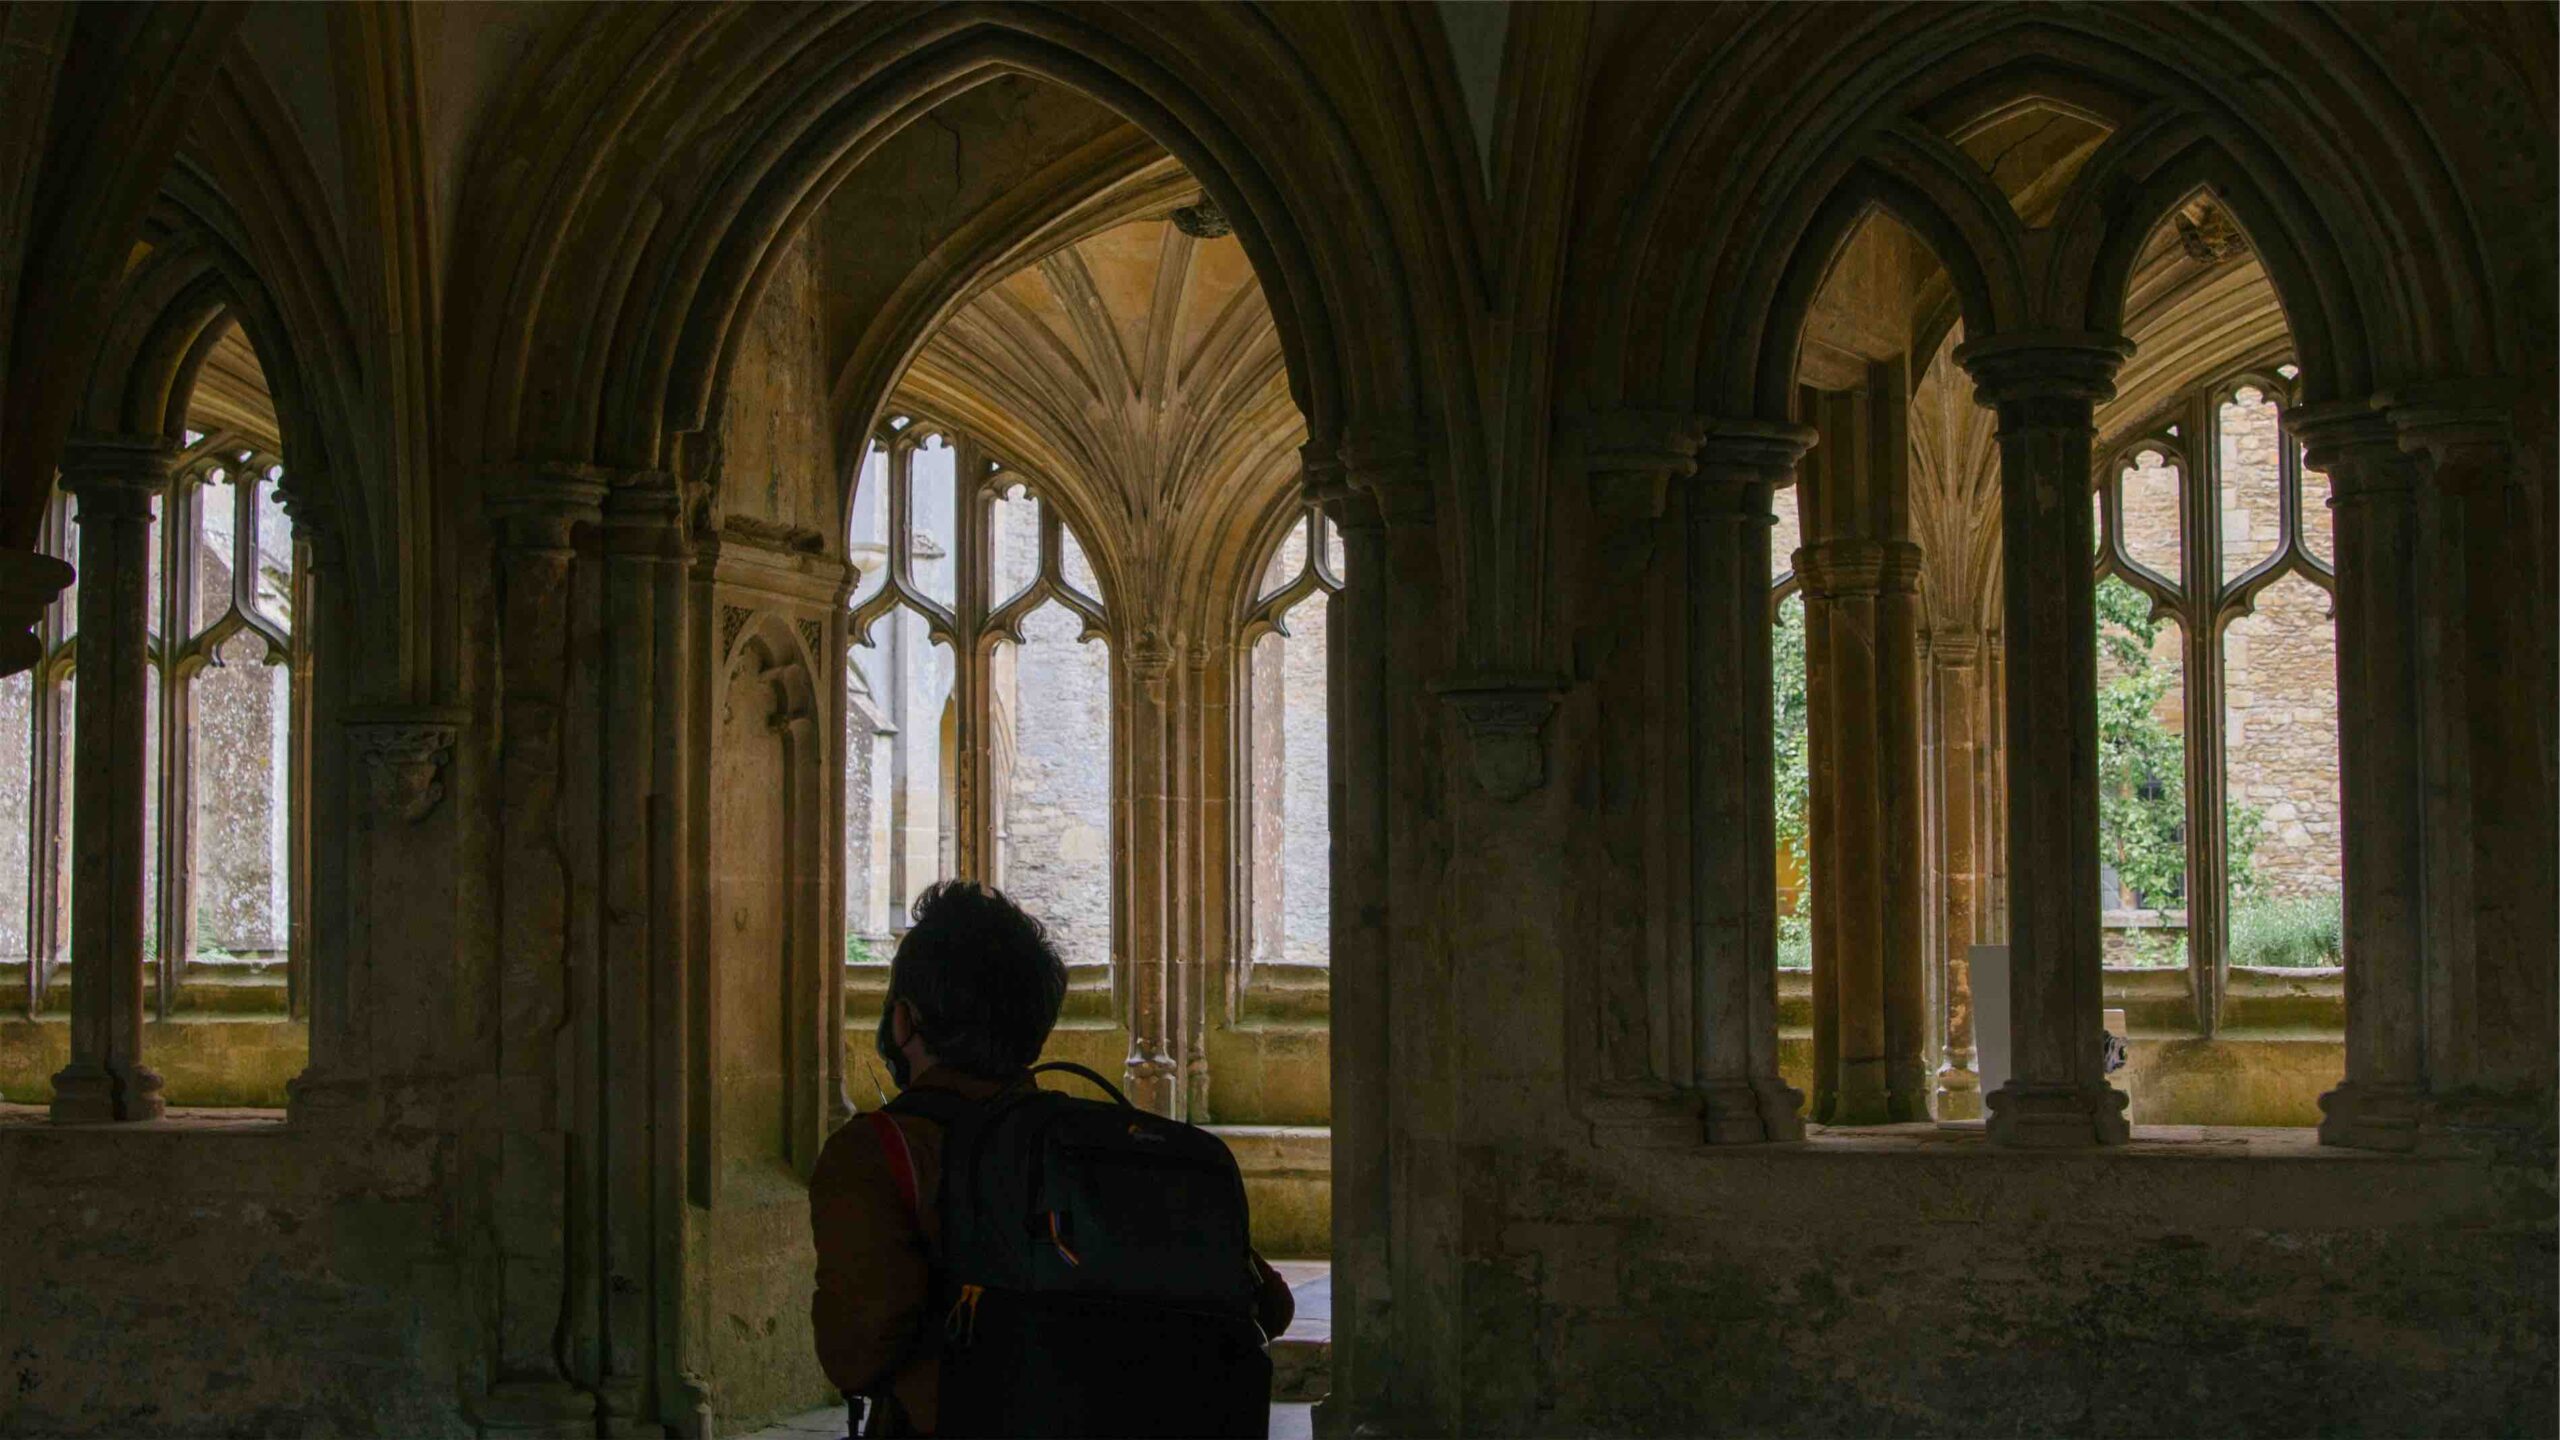 A man stands inside a building with tall cloisters.